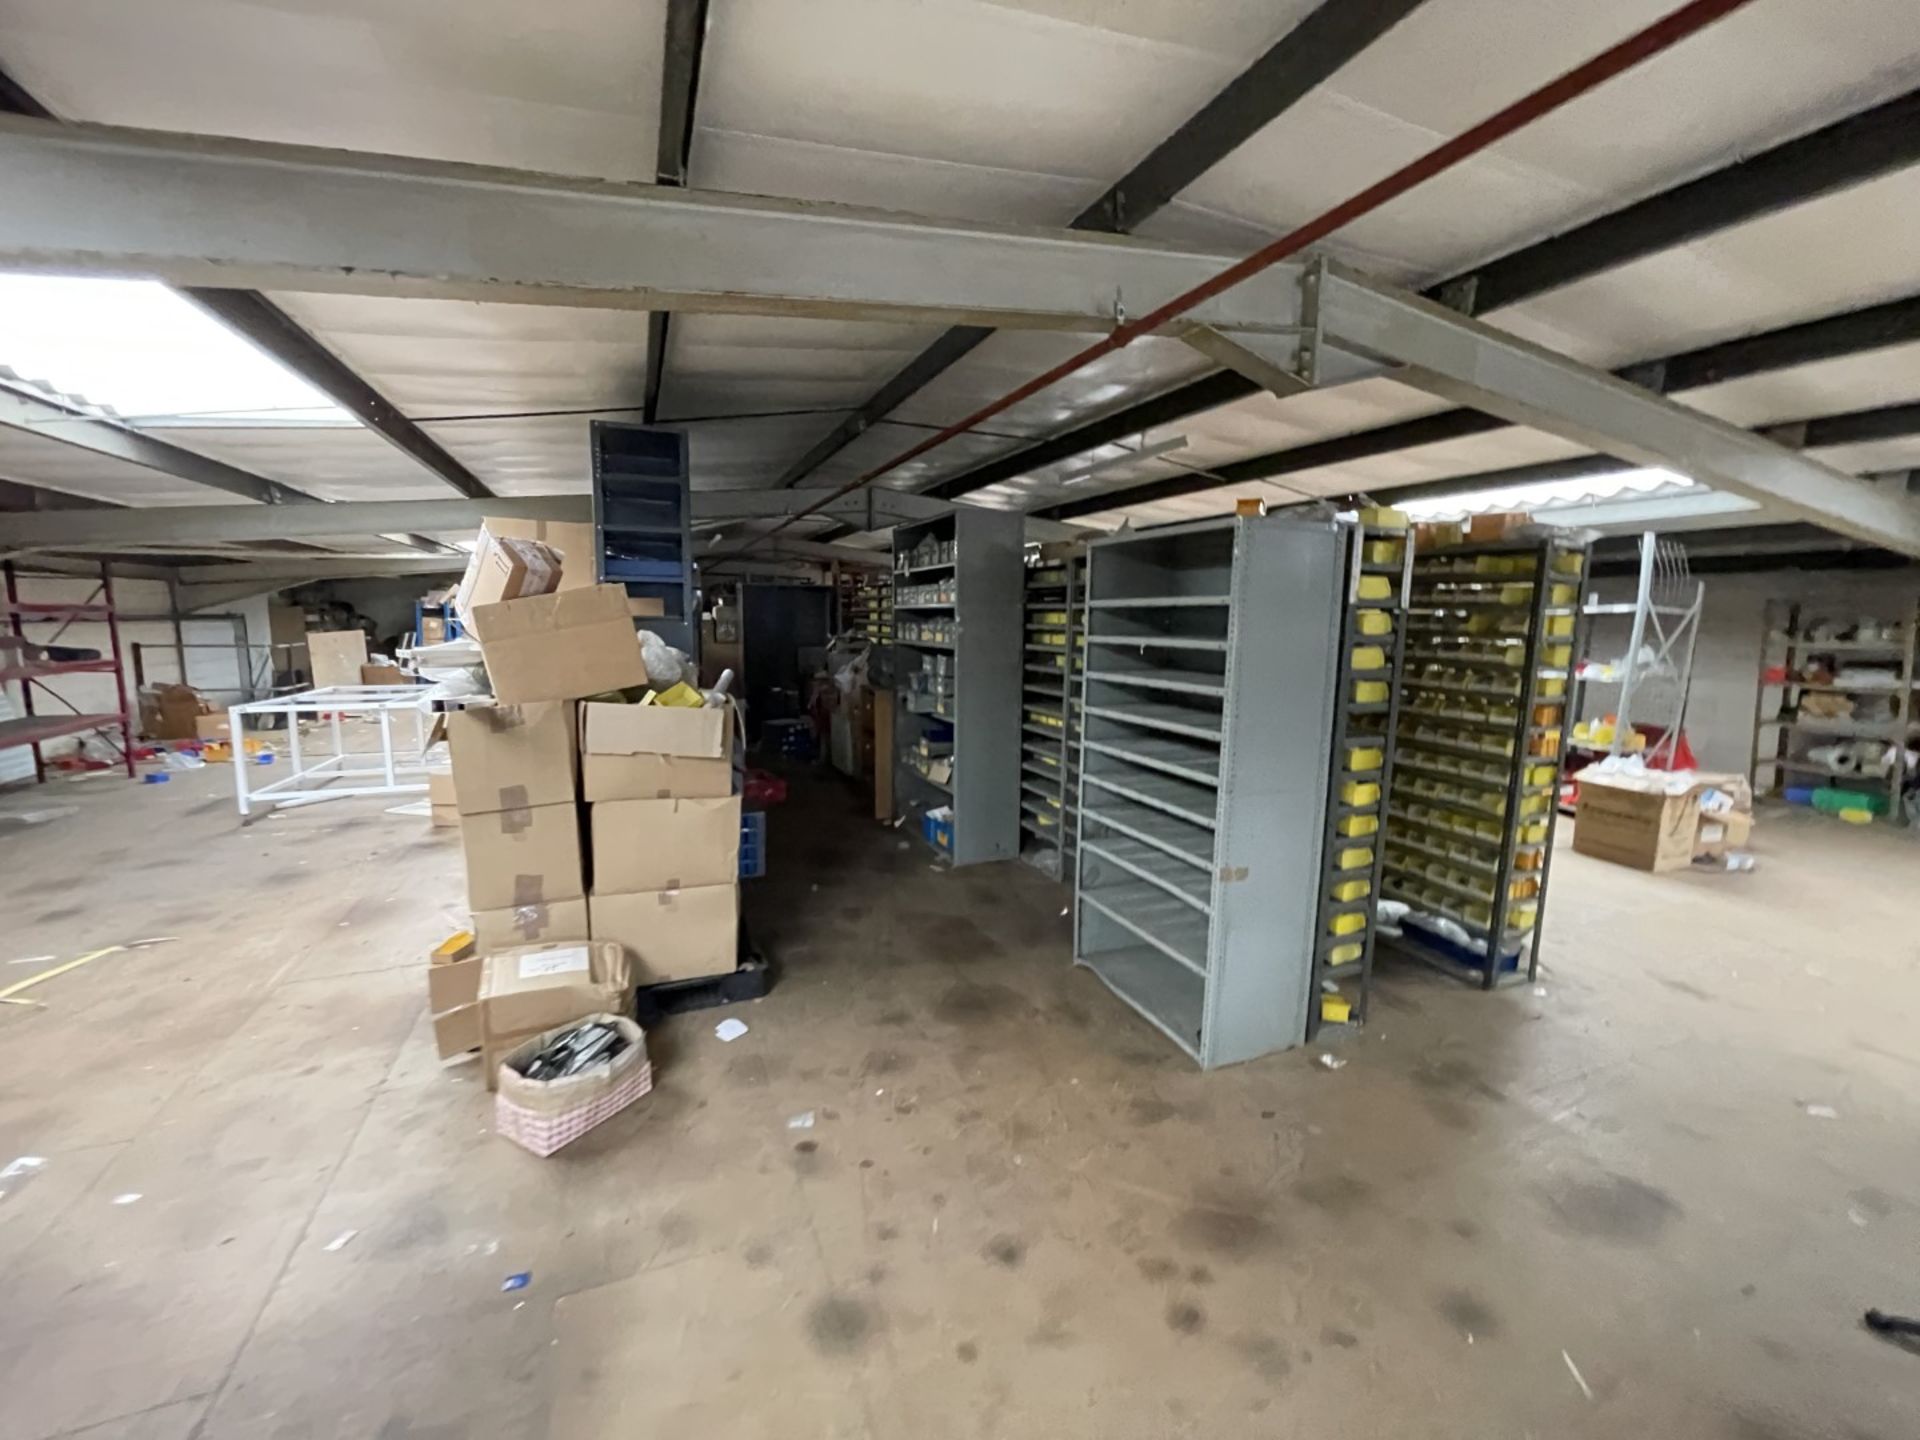 1 x Warehouse Mezzanine Floor With Floor Boards, Lights and Steel Staircase - Approx Size: 16 x 9m - Image 28 of 28